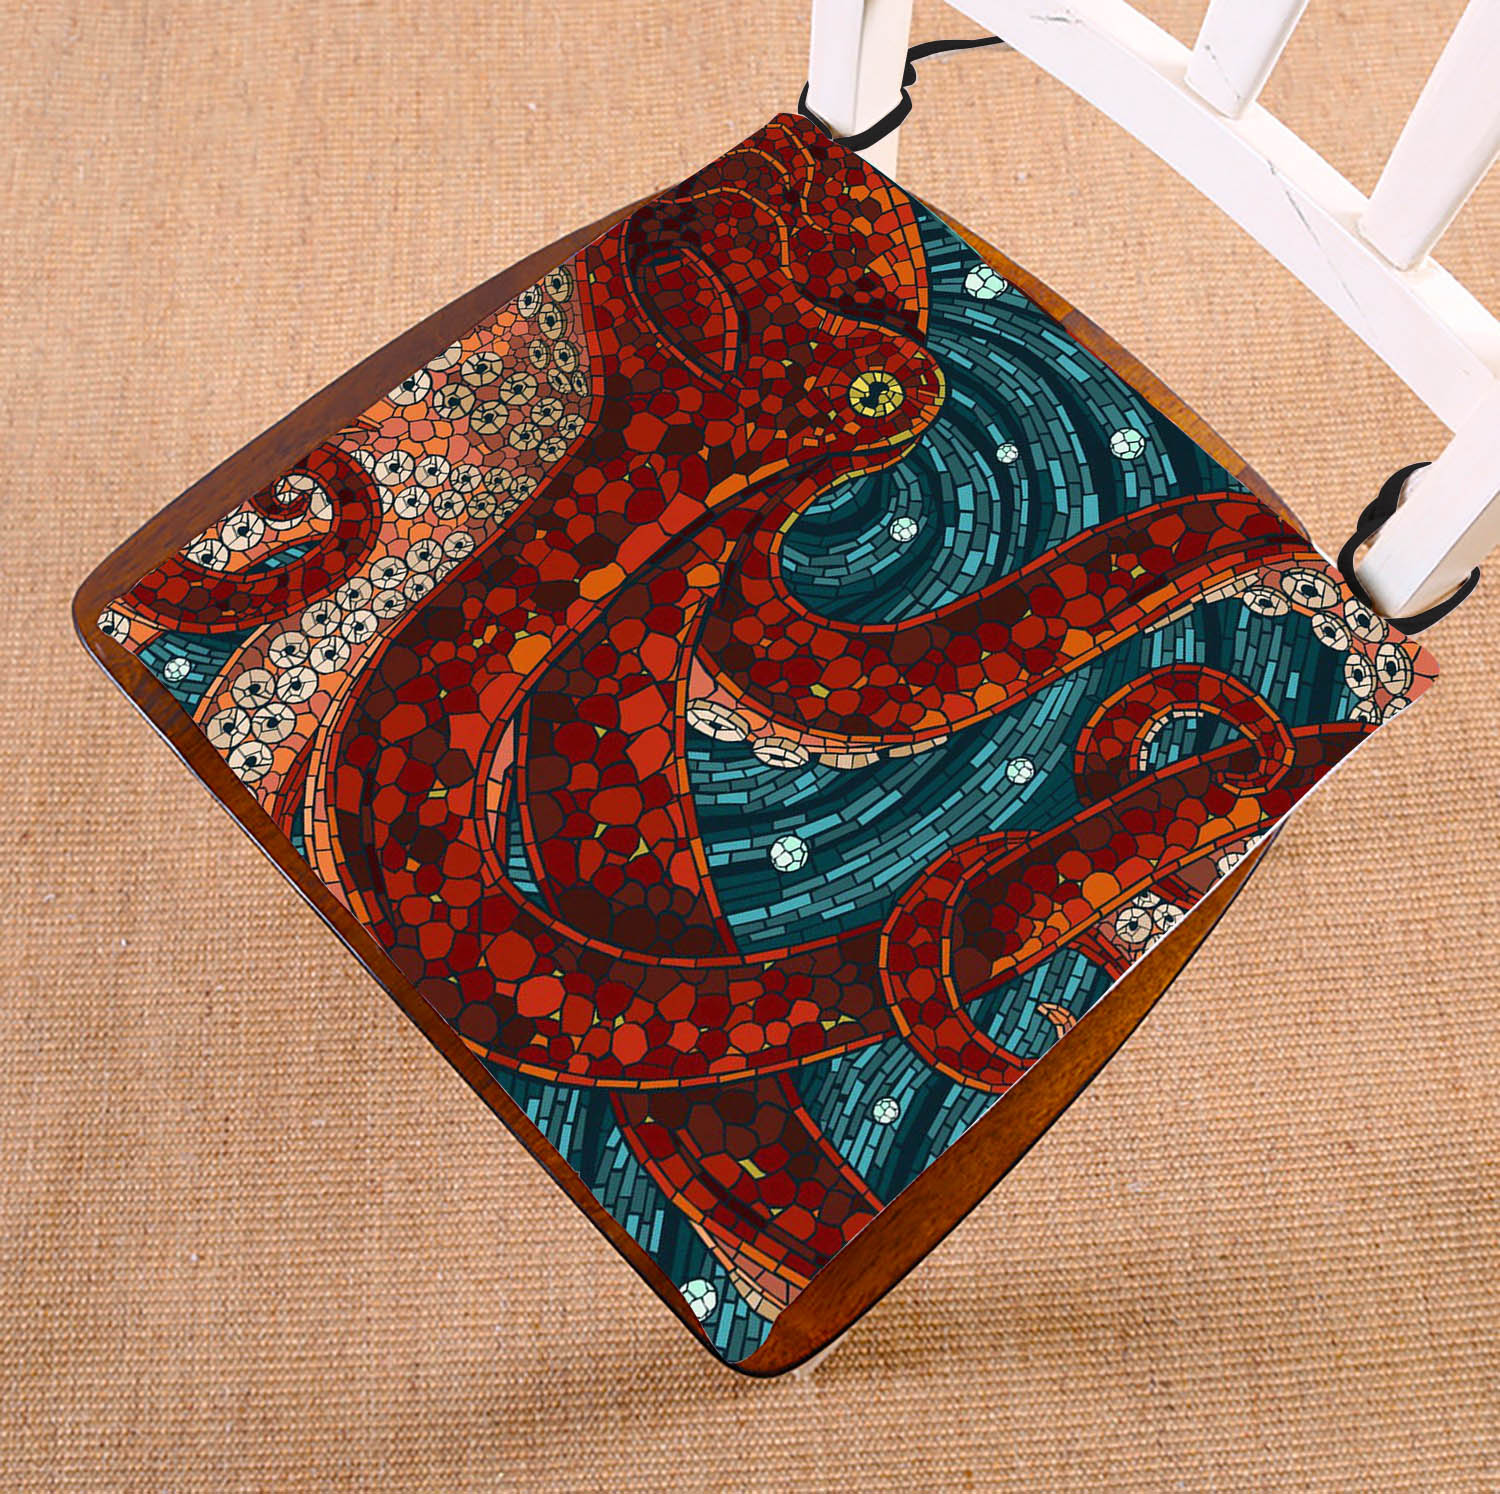 GCKG Ocean Octopus Chair Cushion,Ocean Octopus Chair Pad Seat Cushion Chair Cushion Floor Cushion with Breathable Memory Inner Cushion and Ties Two Sides Printing 16x16 inch - image 1 of 3